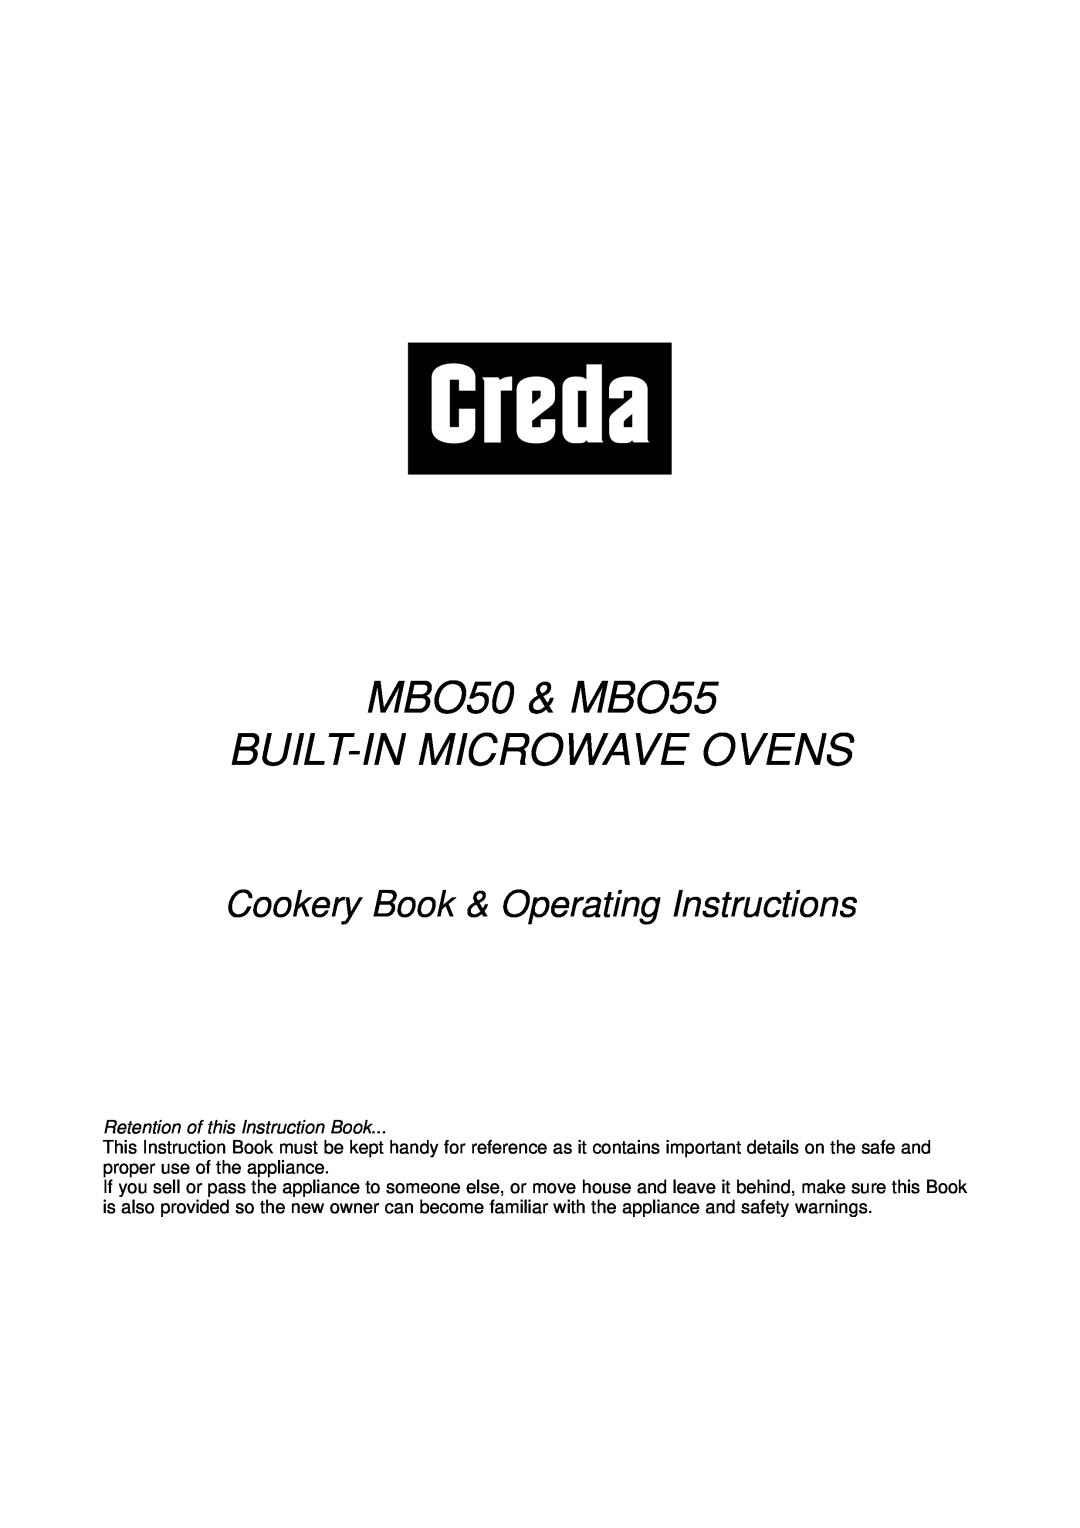 Creda manual MBO50 & MBO55 BUILT-IN MICROWAVE OVENS, Cookery Book & Operating Instructions 